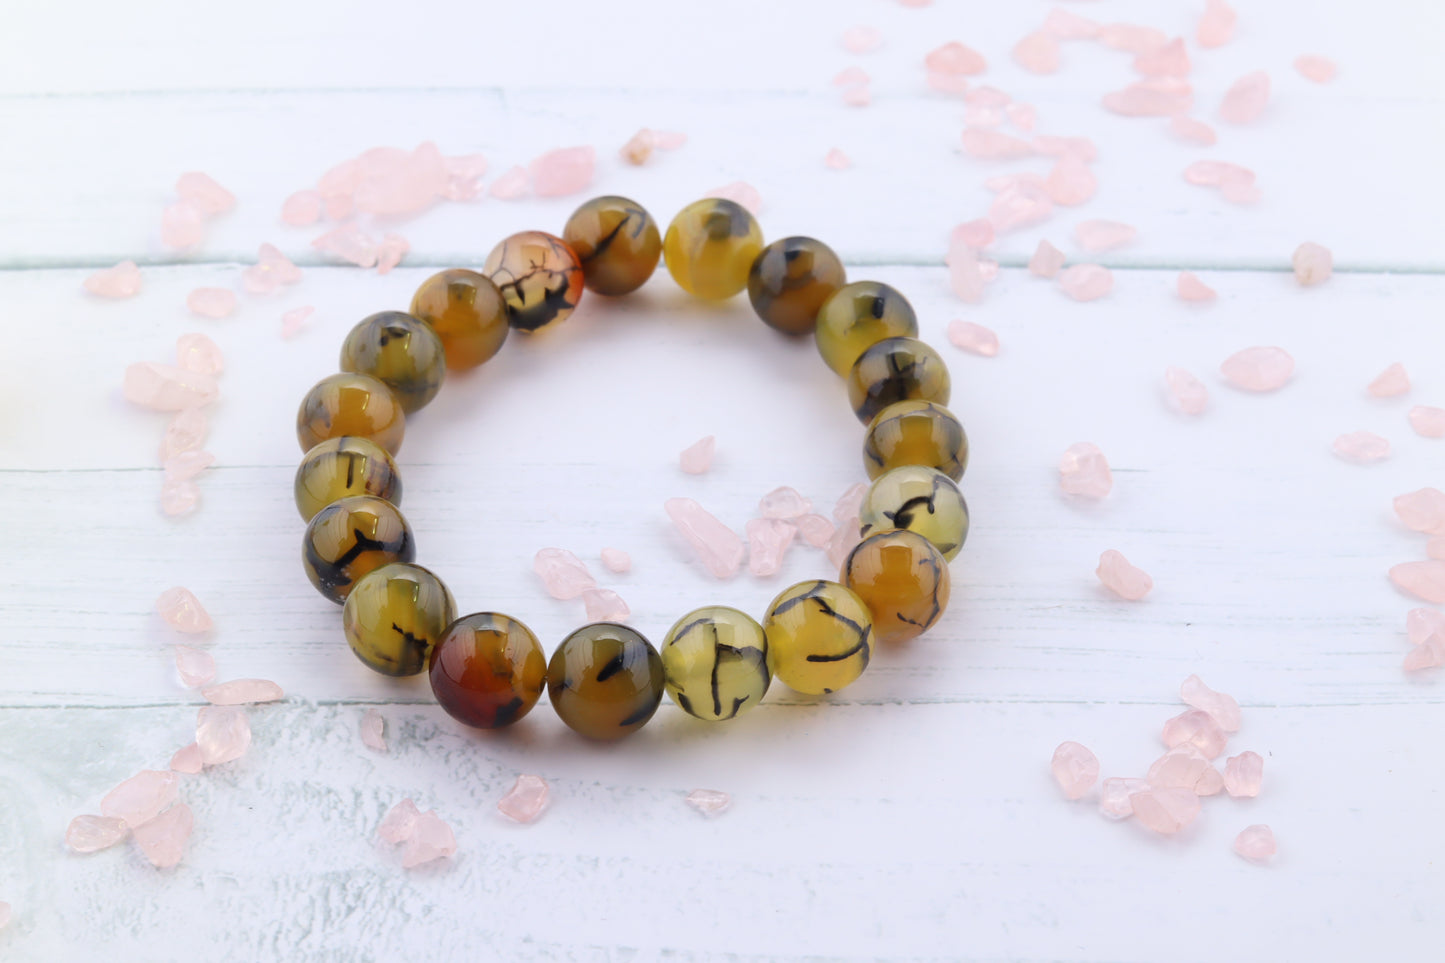 Handmade Dragon Agate Beaded Stretch Bracelet, Yellows and Browns, Neutral colors.